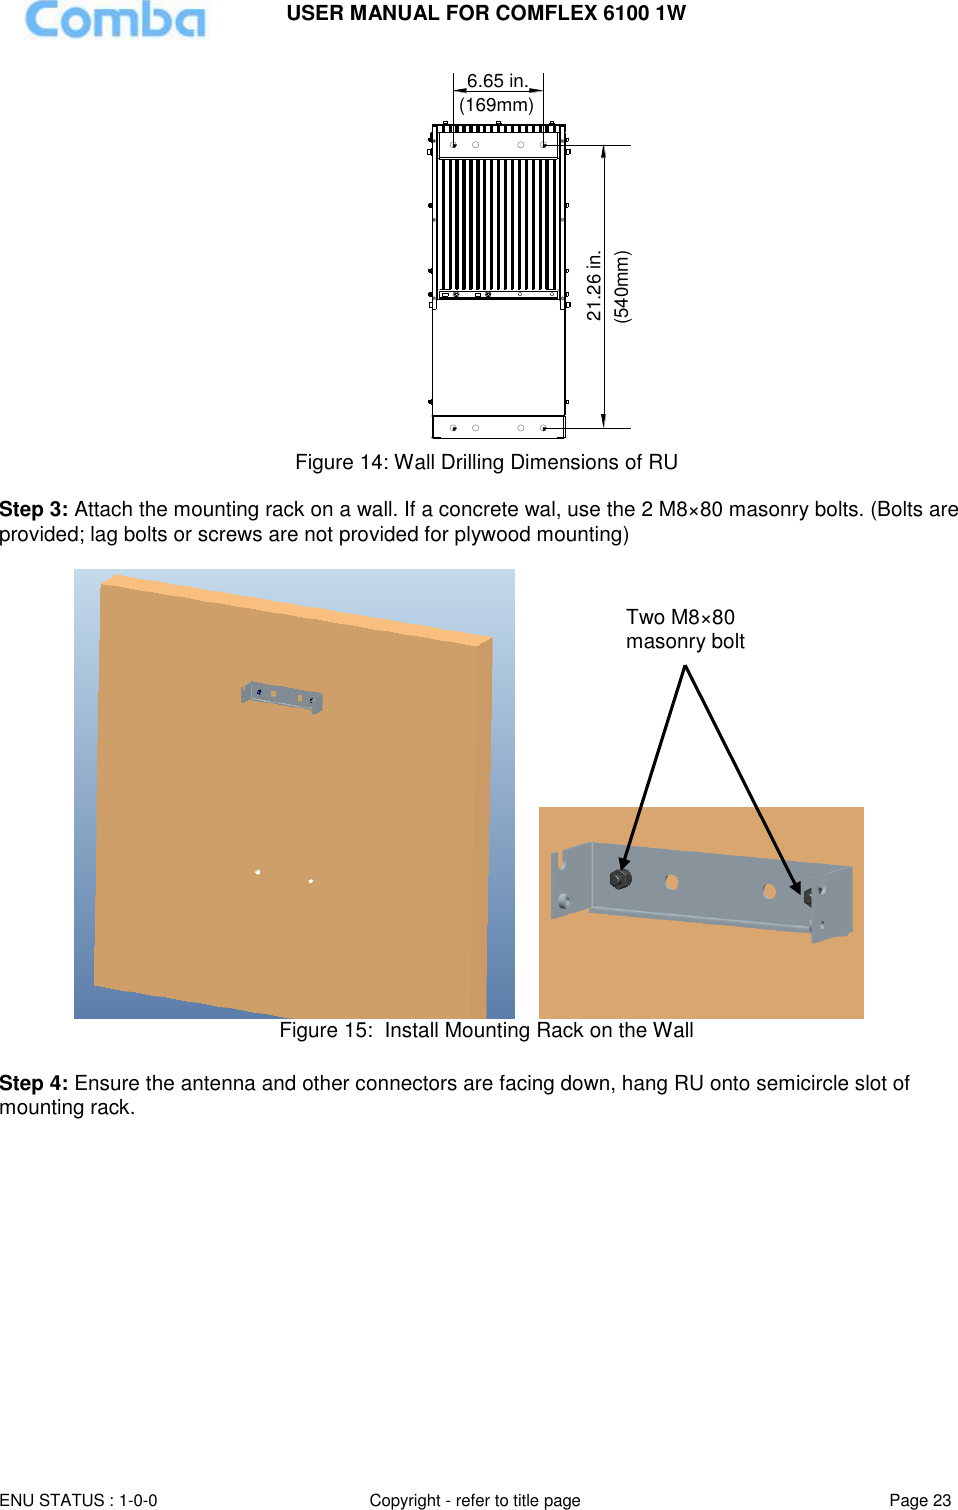 USER MANUAL FOR COMFLEX 6100 1W ENU STATUS : 1-0-0 Copyright - refer to title page Page 23  6.65 in.21.26 in.(540mm)(169mm) Figure 14: Wall Drilling Dimensions of RU  Step 3: Attach the mounting rack on a wall. If a concrete wal, use the 2 M8×80 masonry bolts. (Bolts are provided; lag bolts or screws are not provided for plywood mounting)        Figure 15:  Install Mounting Rack on the Wall  Step 4: Ensure the antenna and other connectors are facing down, hang RU onto semicircle slot of mounting rack. Two M8×80 masonry bolt 